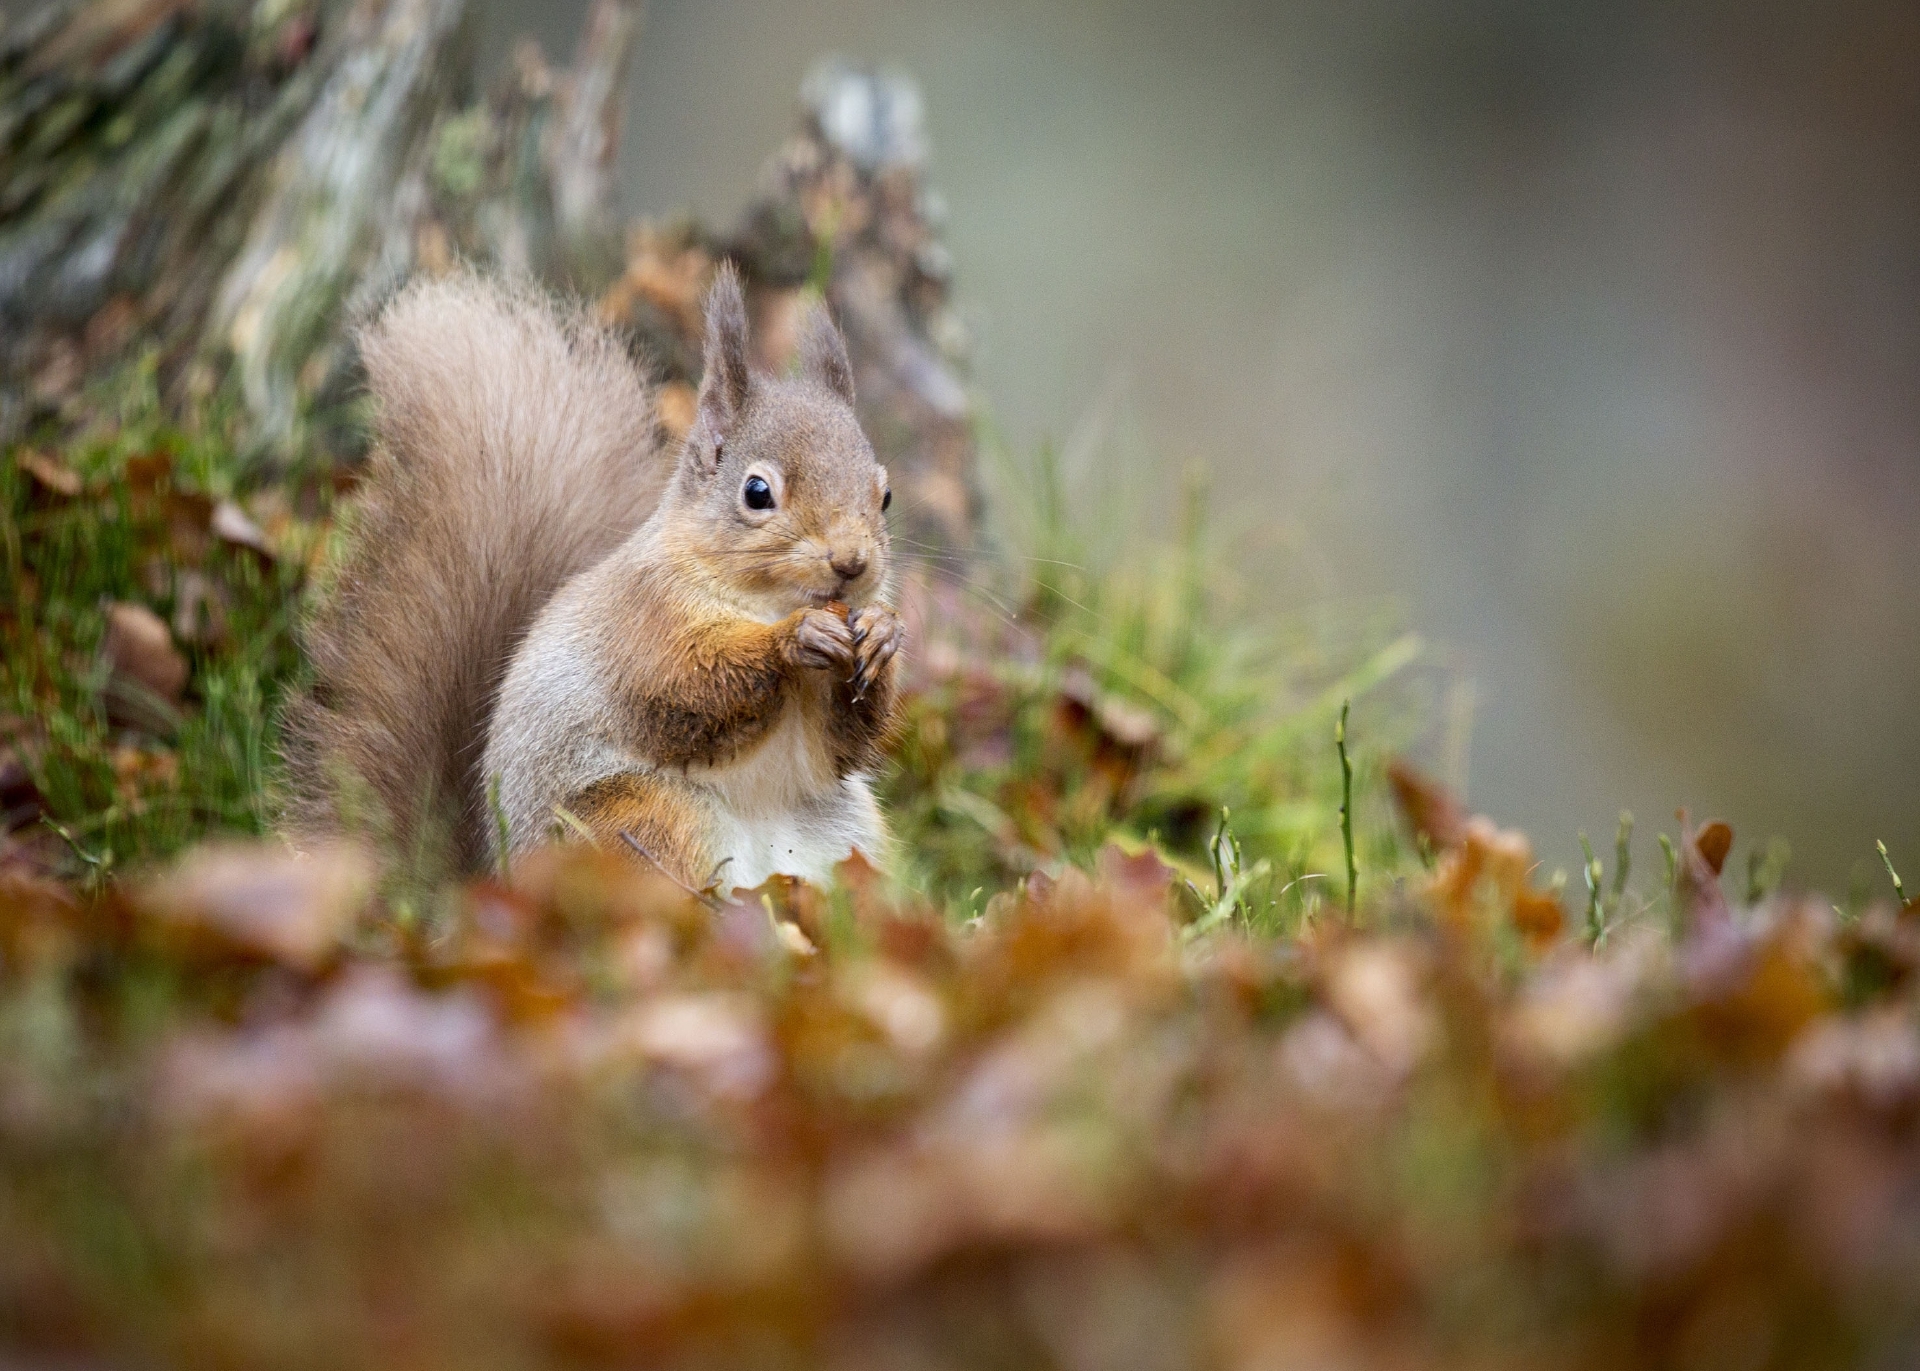 The new project aims to protect Scotland's natural environment and wildlife.